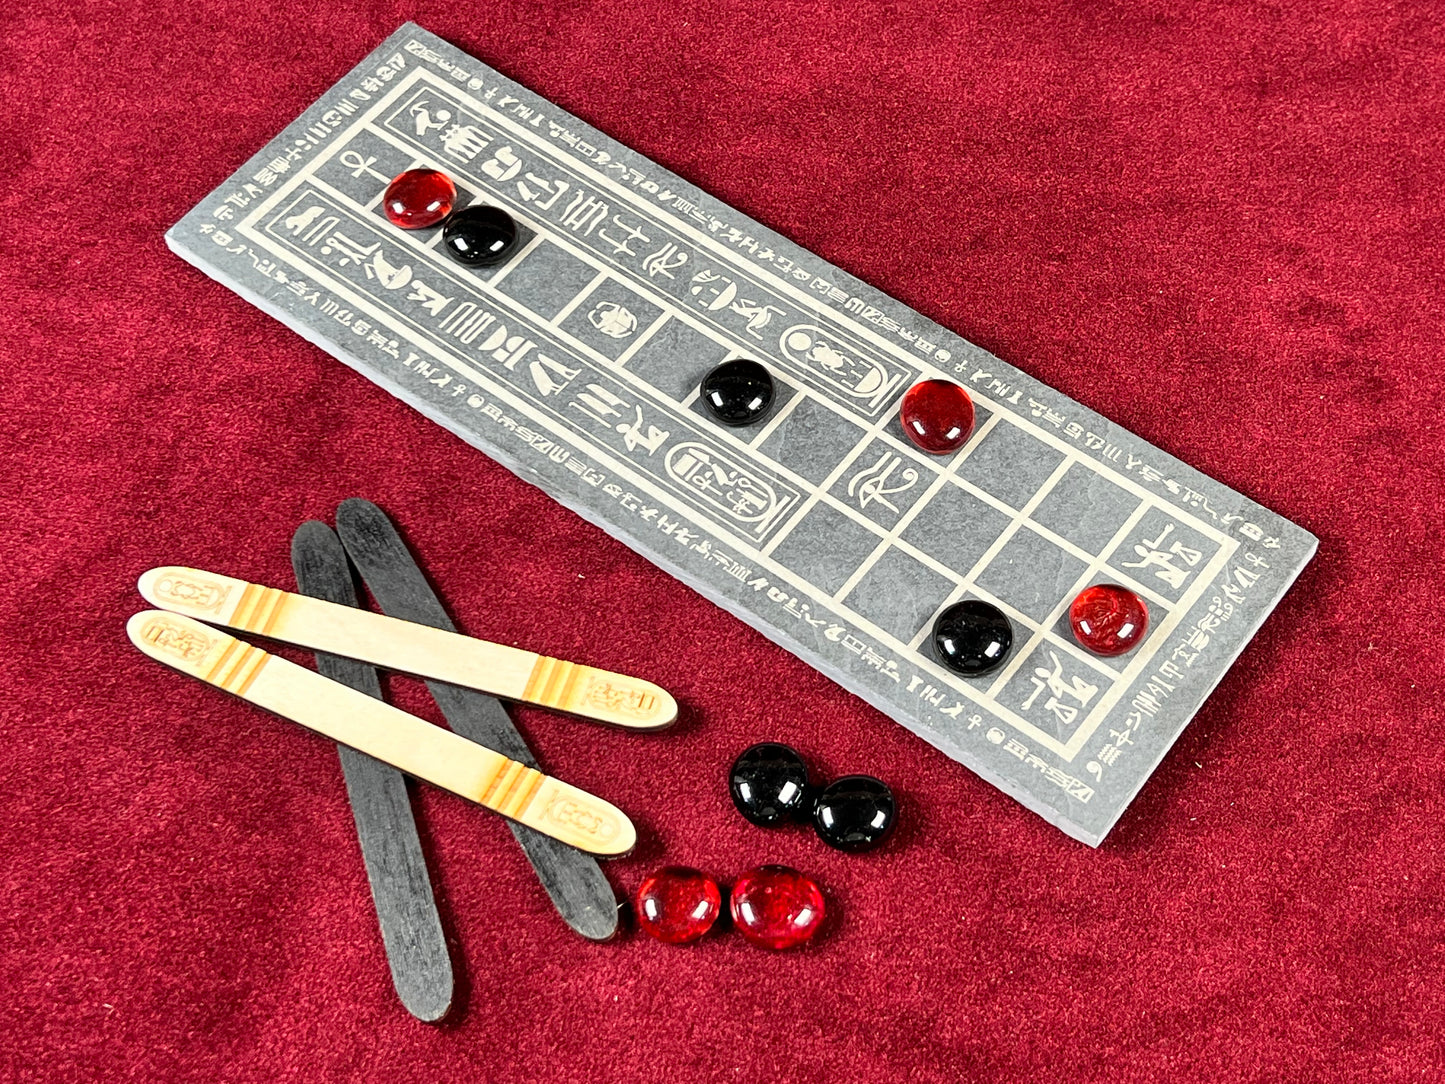 ASEB ~ The Ancient Egyptian Game of 20 Squares. Engraved in Natural Stone, Featuring Glass Pawns and Egyptian Casting Sticks.